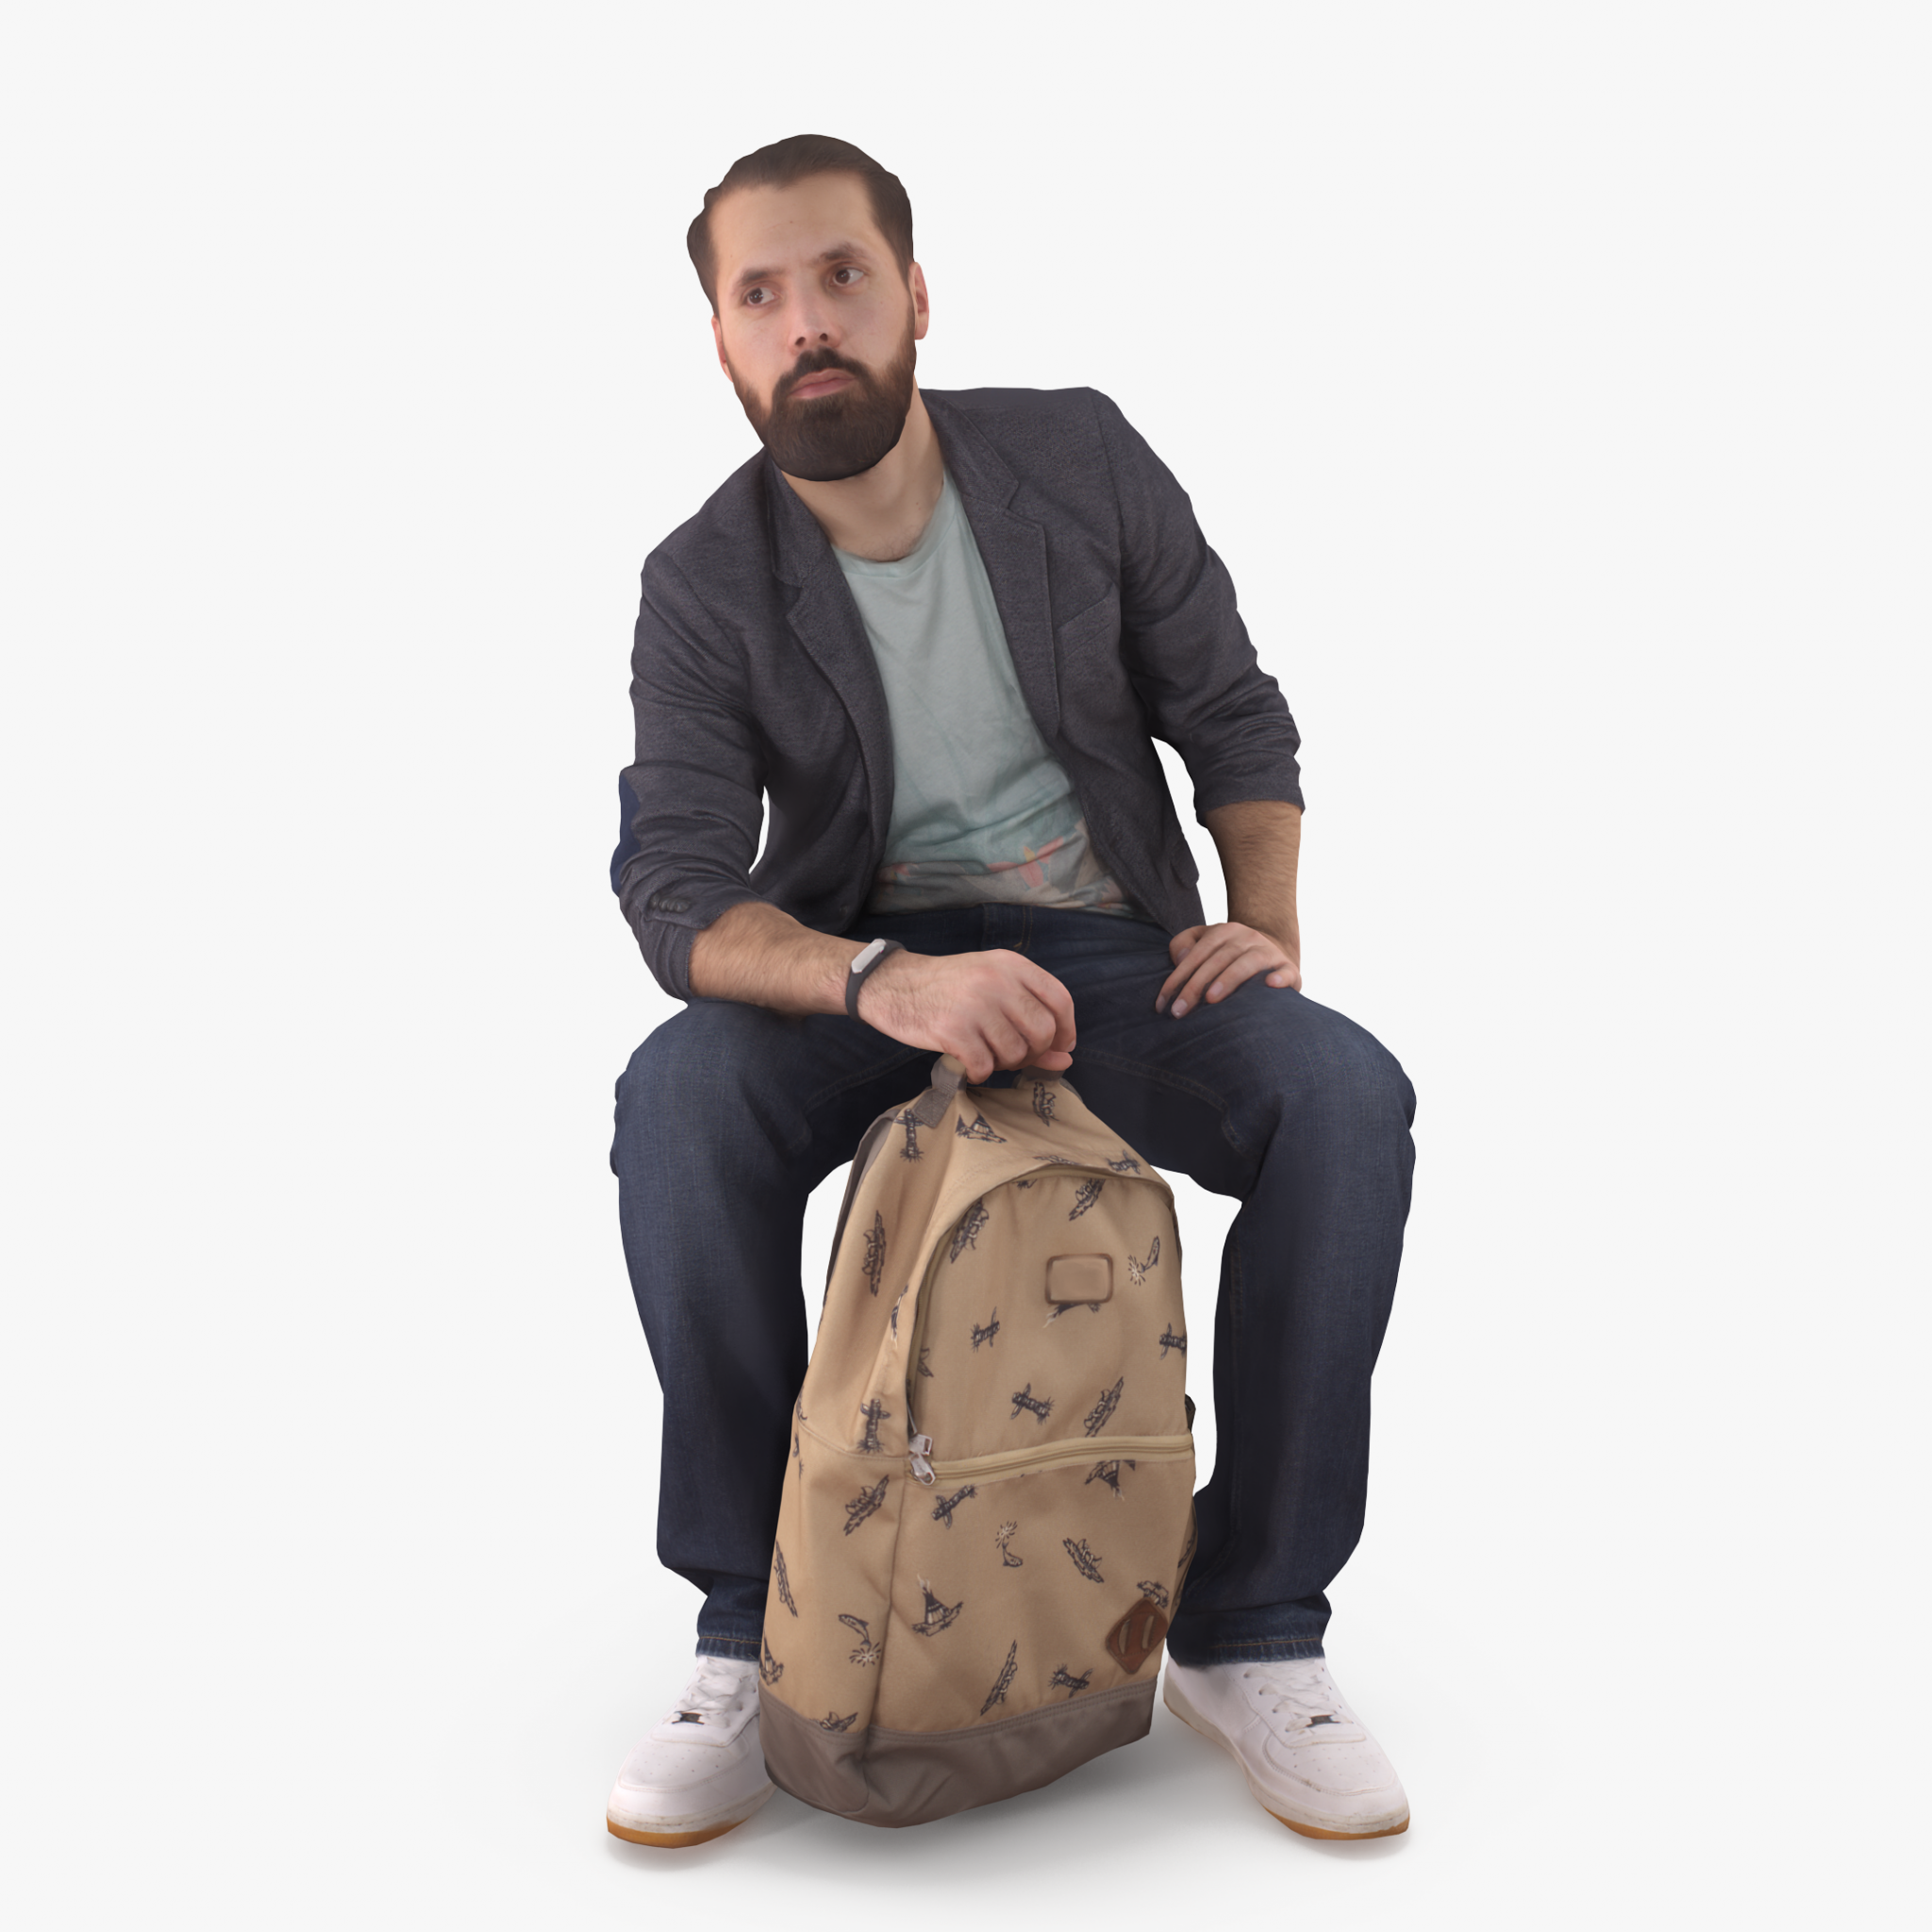 Bearded Man with Bag 3D Model | 3DTree Scanning Studio